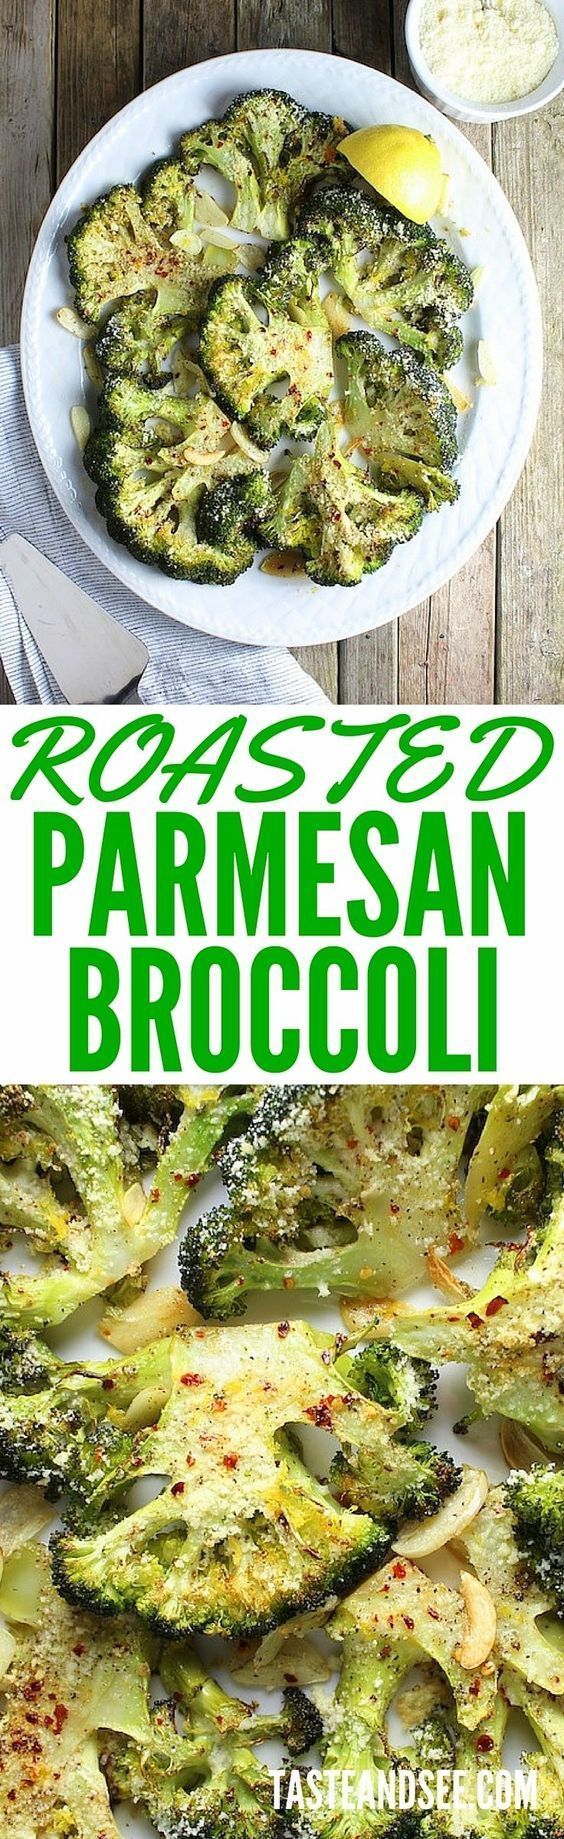 Roasted Parmesan #Broccoli – Roasted with olive oil, Parmesan cheese, sliced garlic, and finished with lemon zest. Super simple &